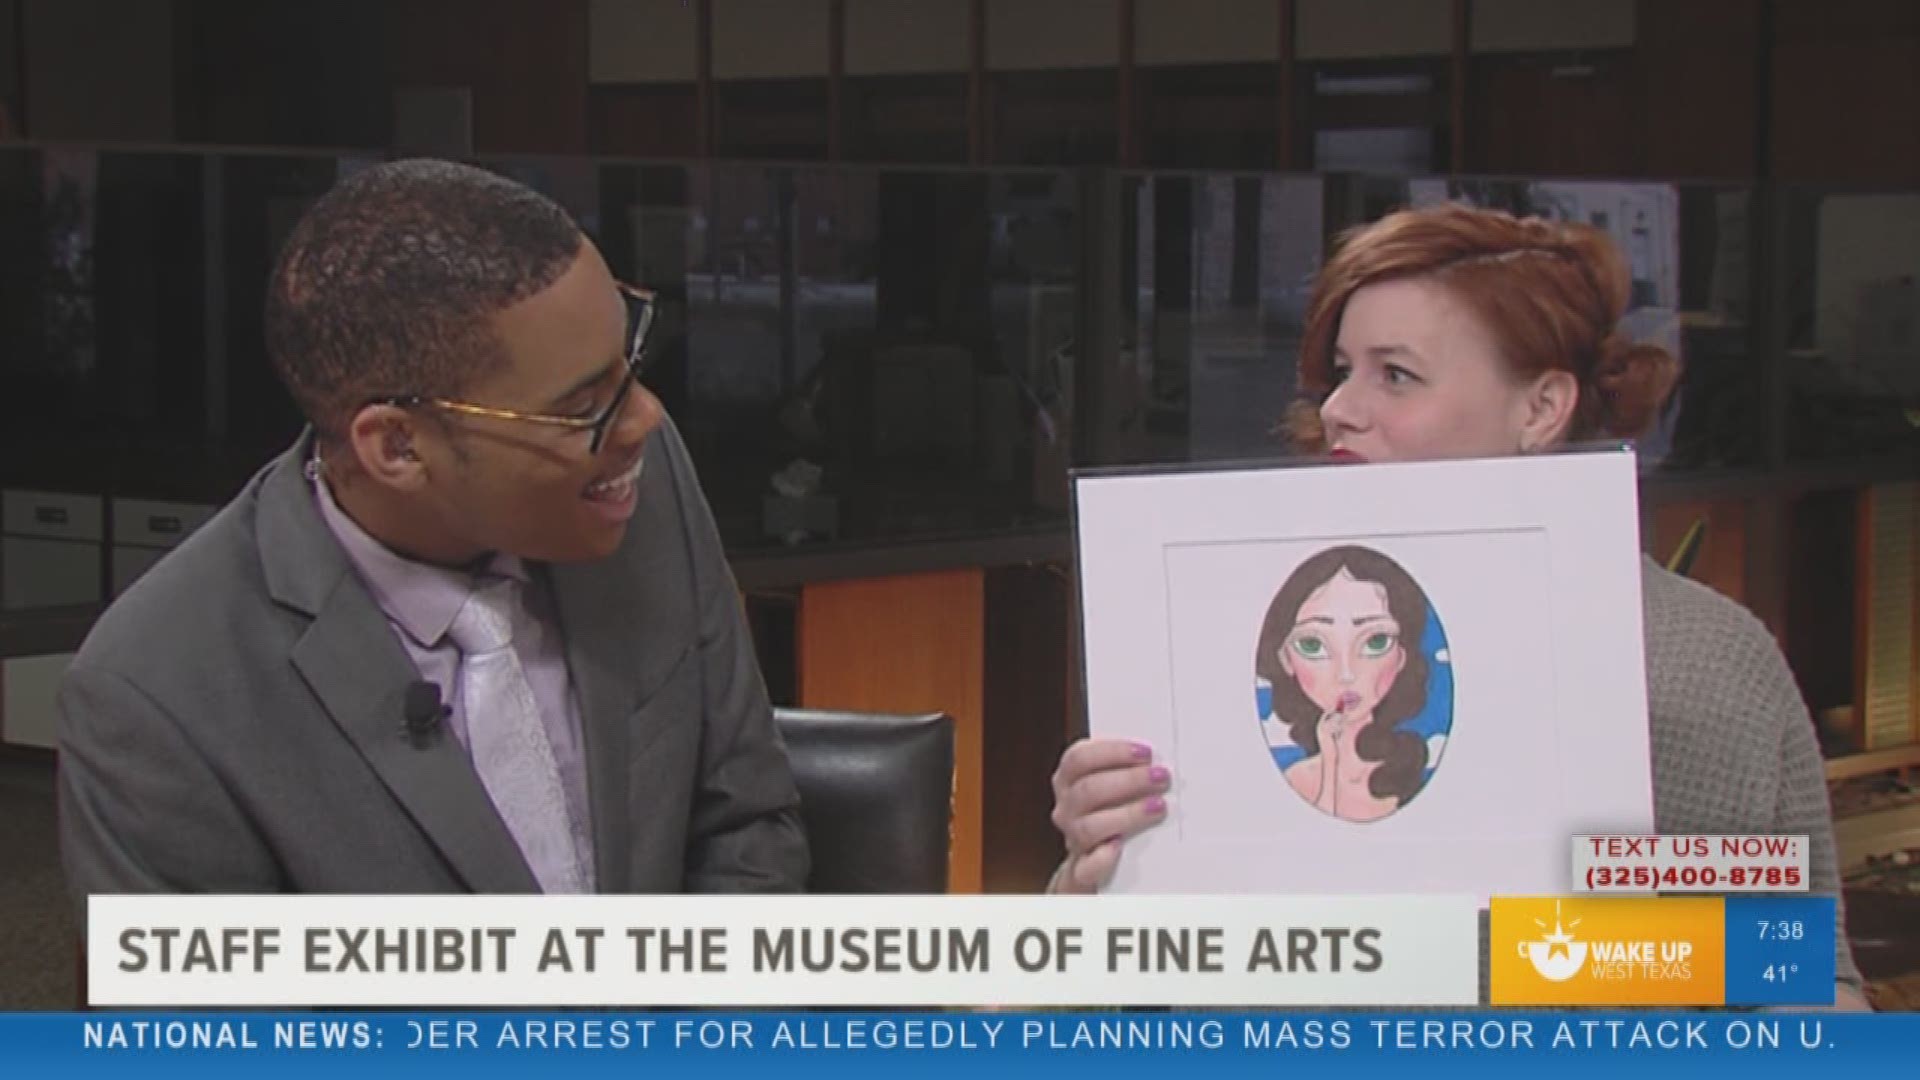 Our Malik Mingo spoke with the San Angelo Museum of Fine Arts about their upcoming staff exhibit.